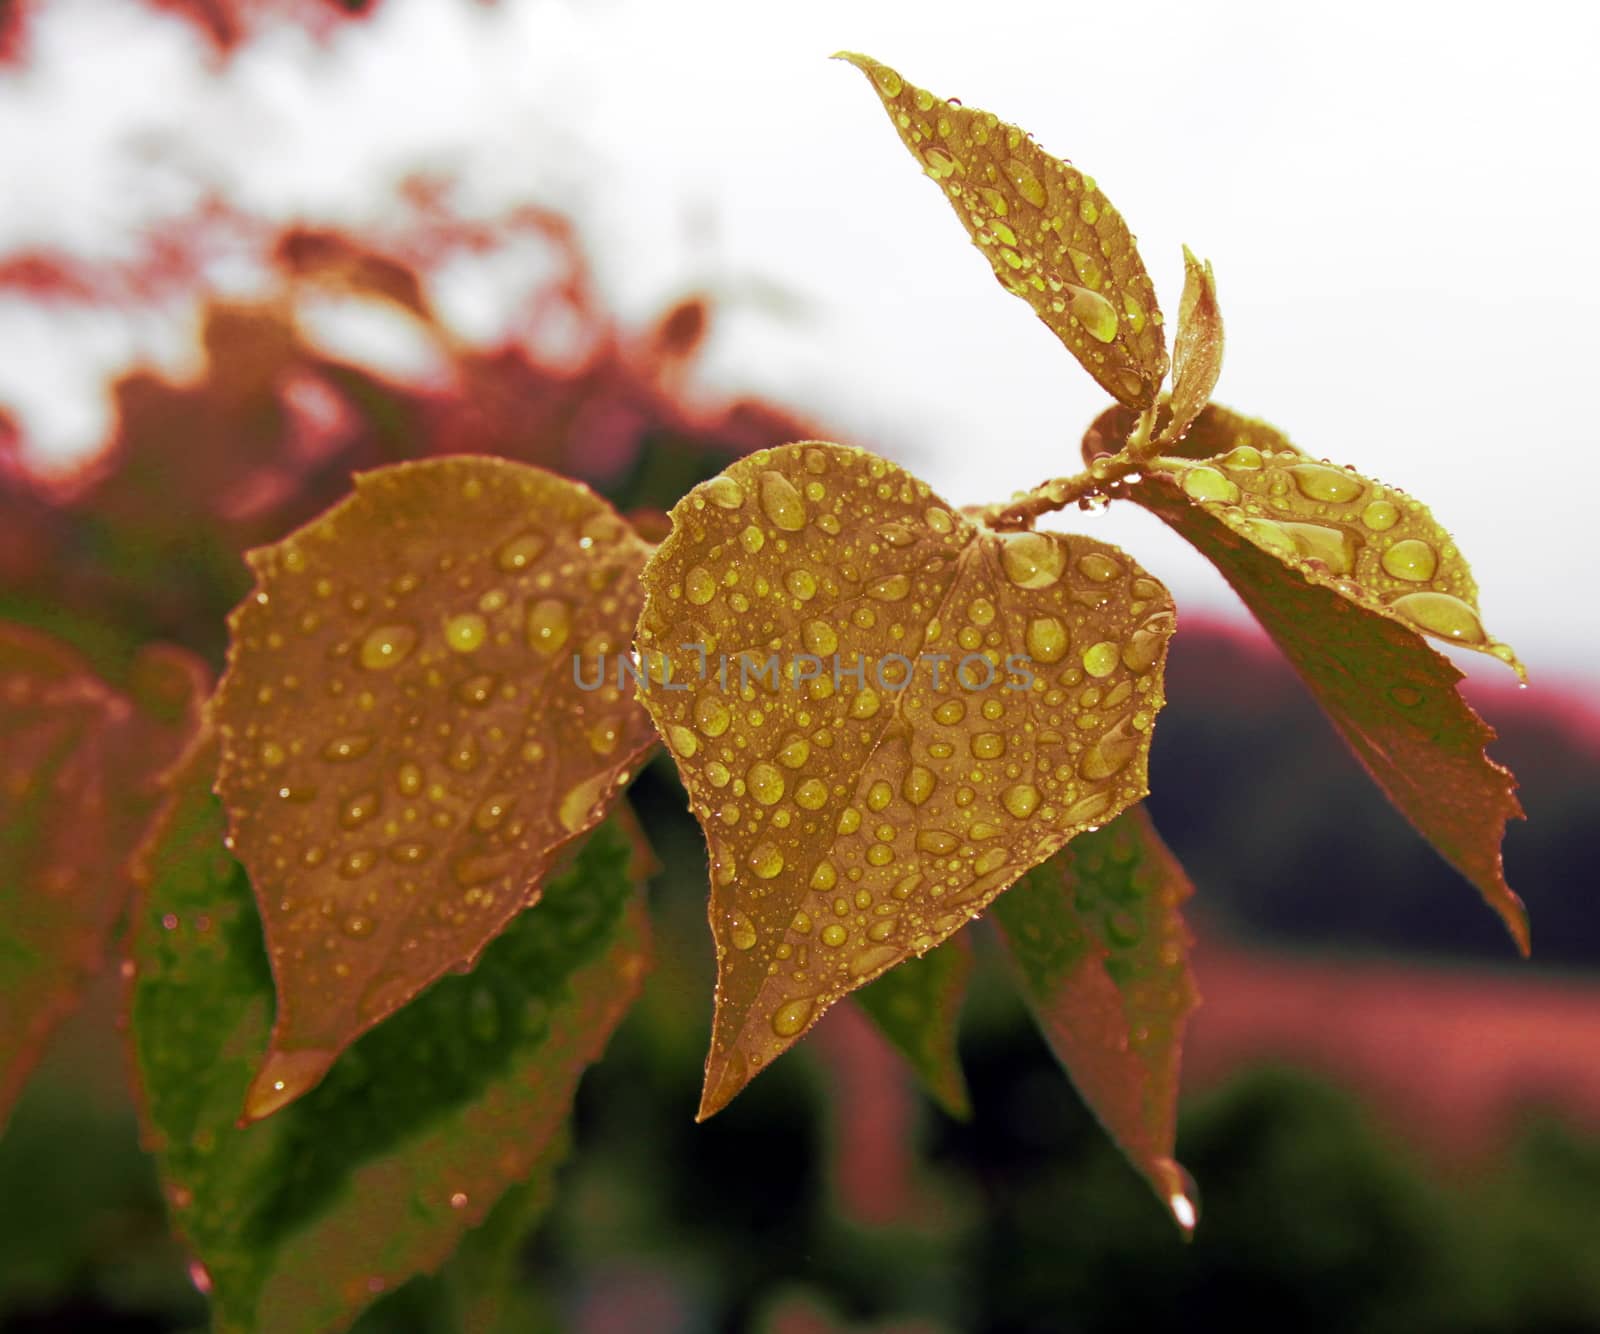 Heart-shaped leaf with rain droplets from recent shower, in retro colors